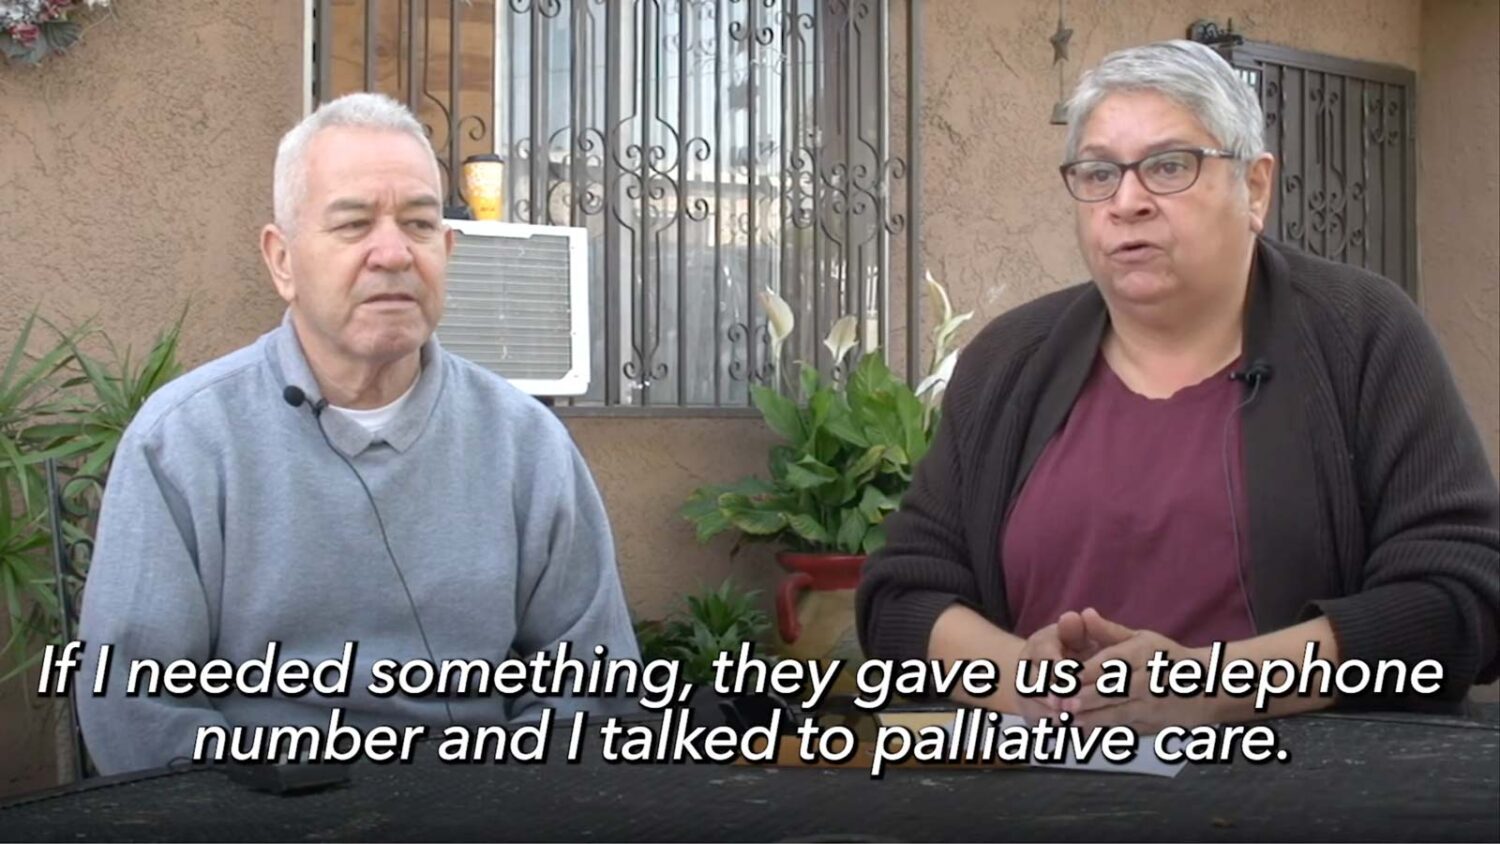 Spanish-language Videos Use First-Person Stories to Increase Awareness of Palliative Care Among Latinx Communities